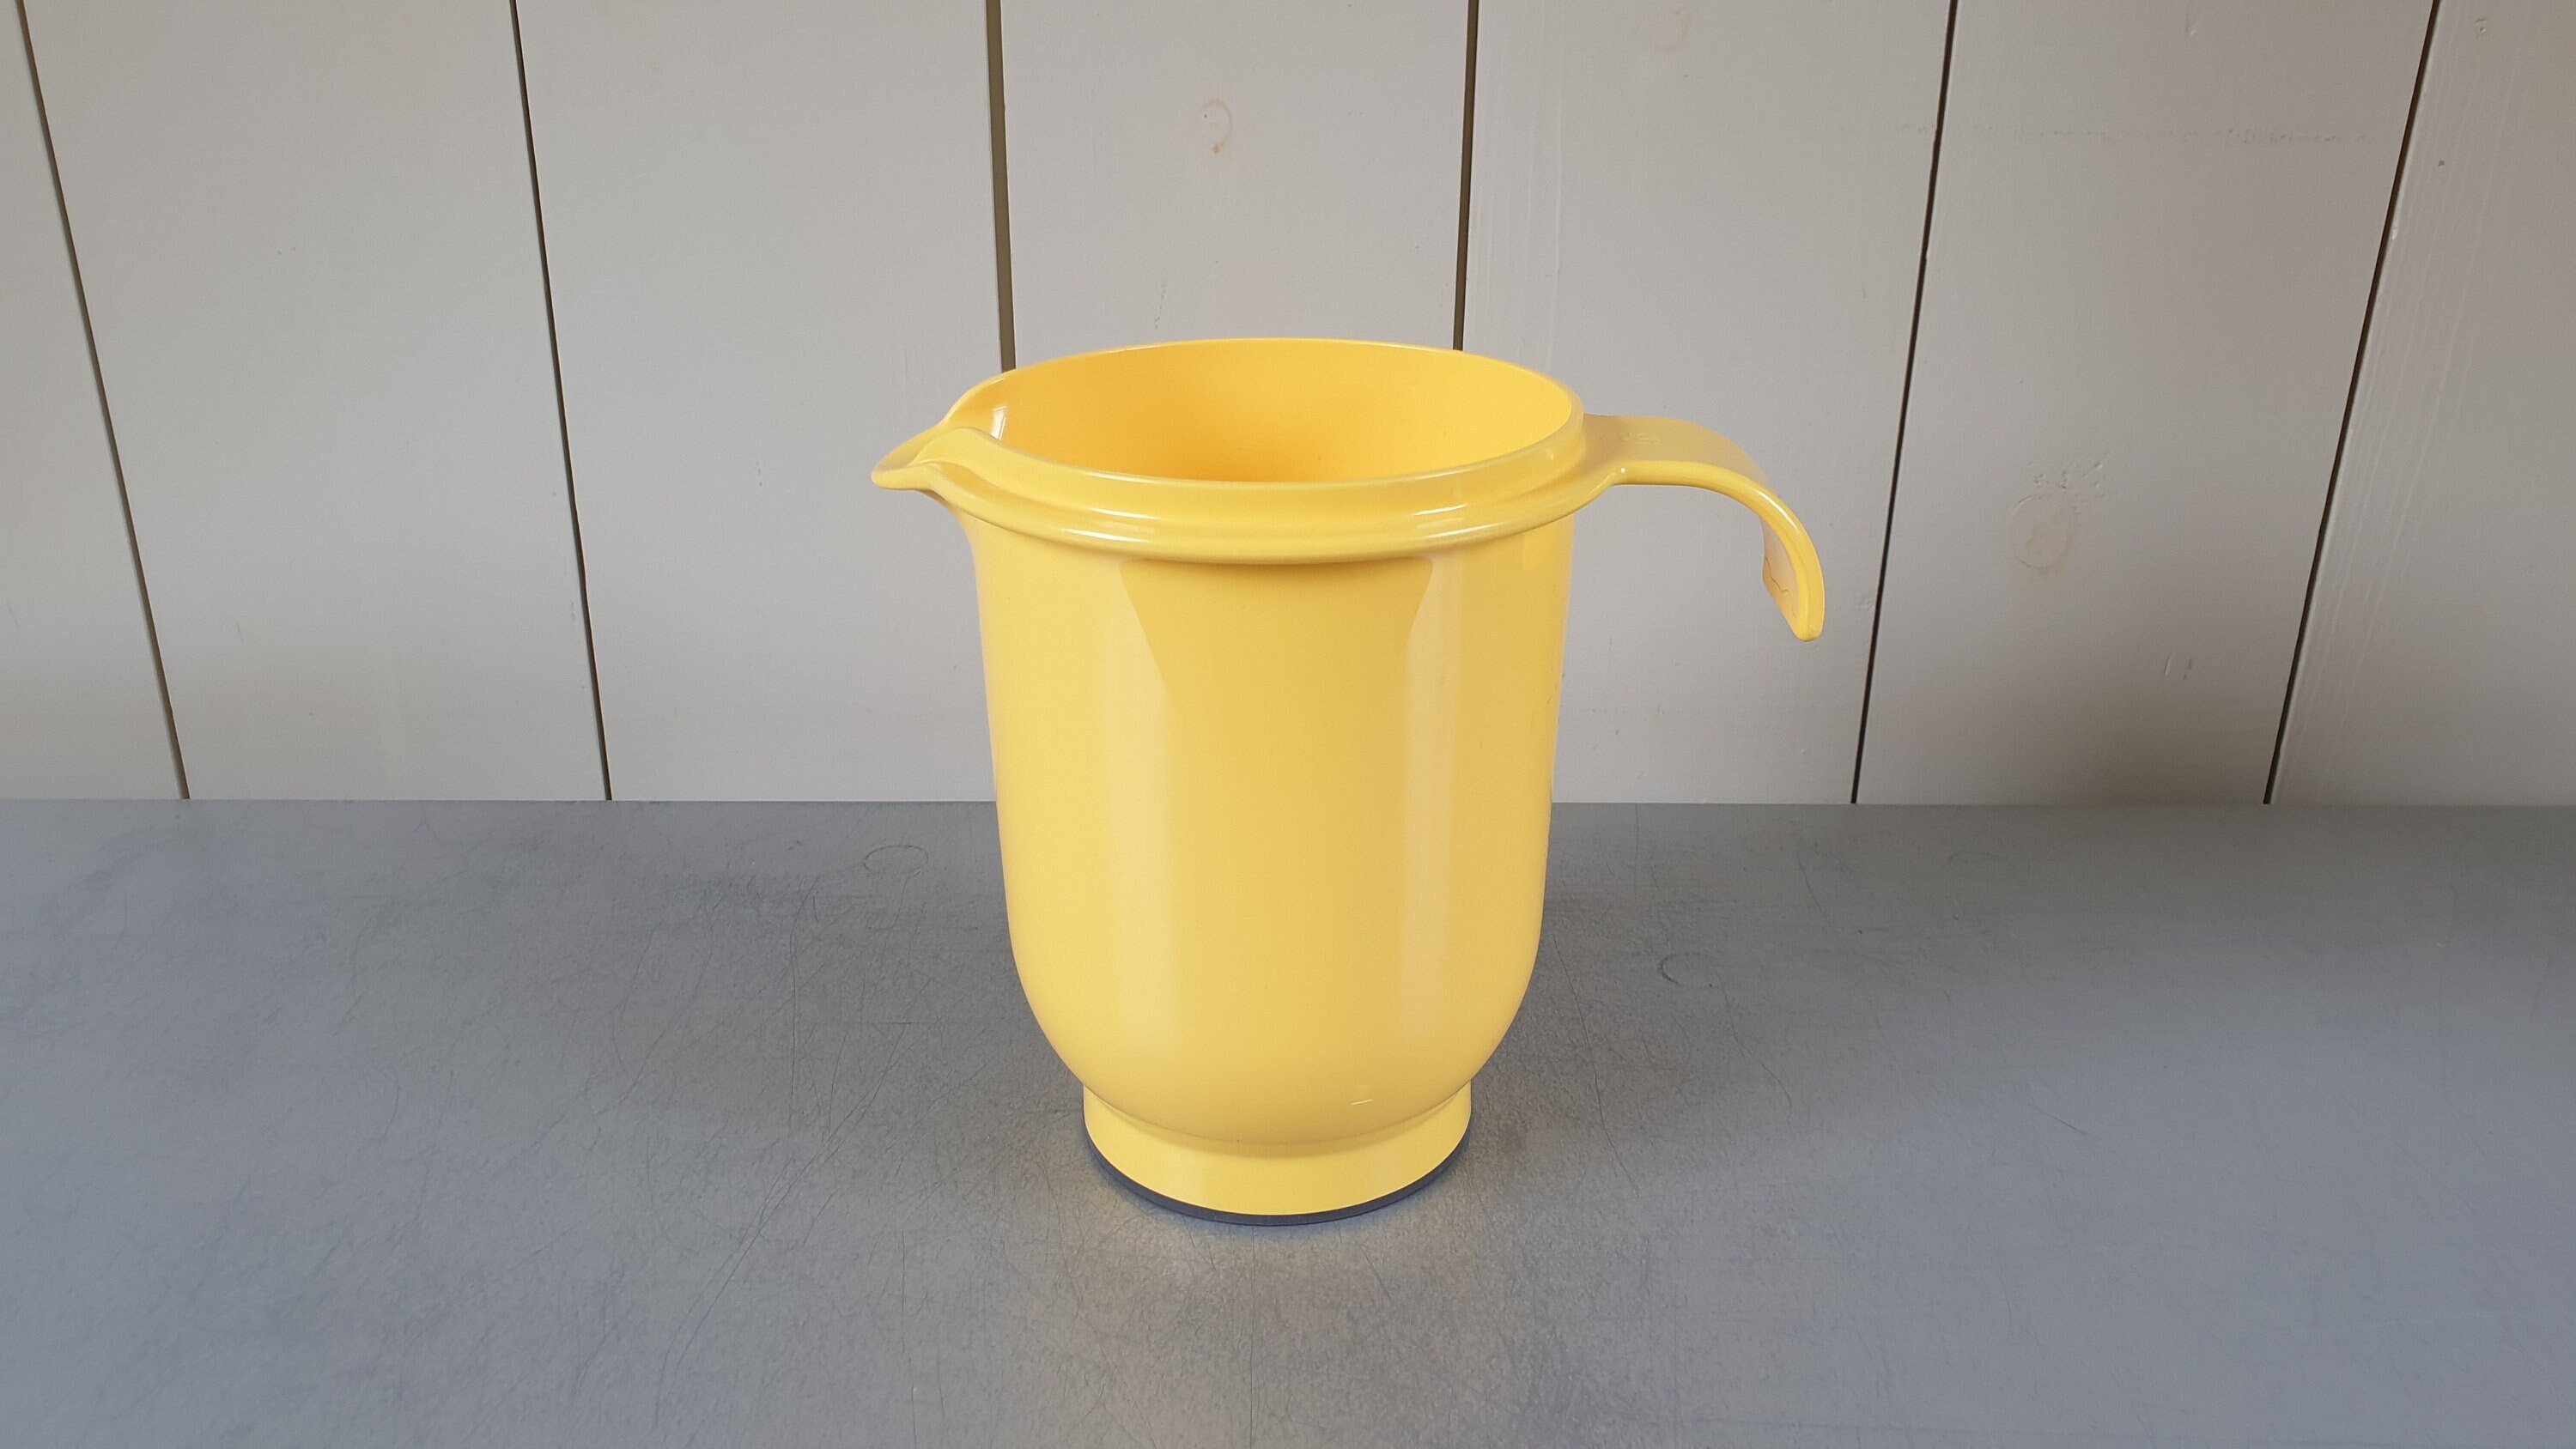 Vintage 1970s Rubbermaid Juice/water Jugs Your Choice of Jug: Orange 1.42L,  Yellow 1.42L or Yellow 2.25L Collectible Gift Idea 